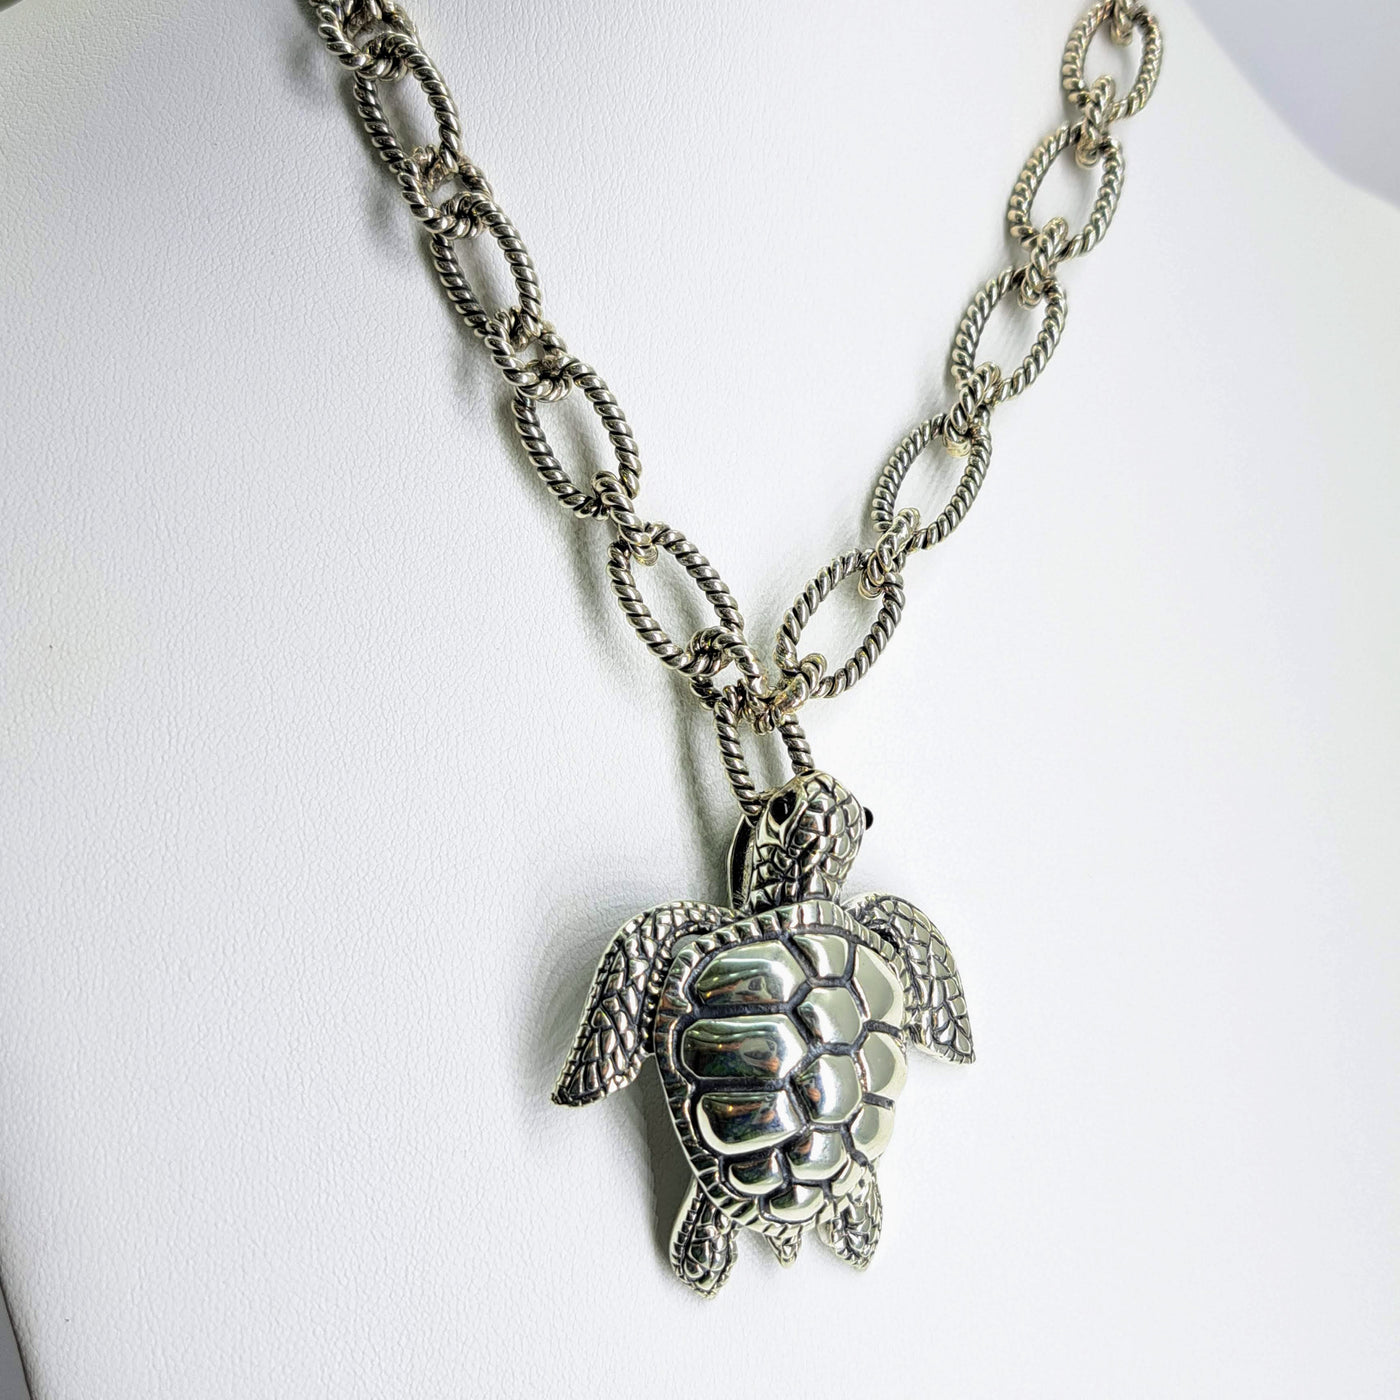 "Terrapin Station" Necklace/Pendant - Sterling Turtle